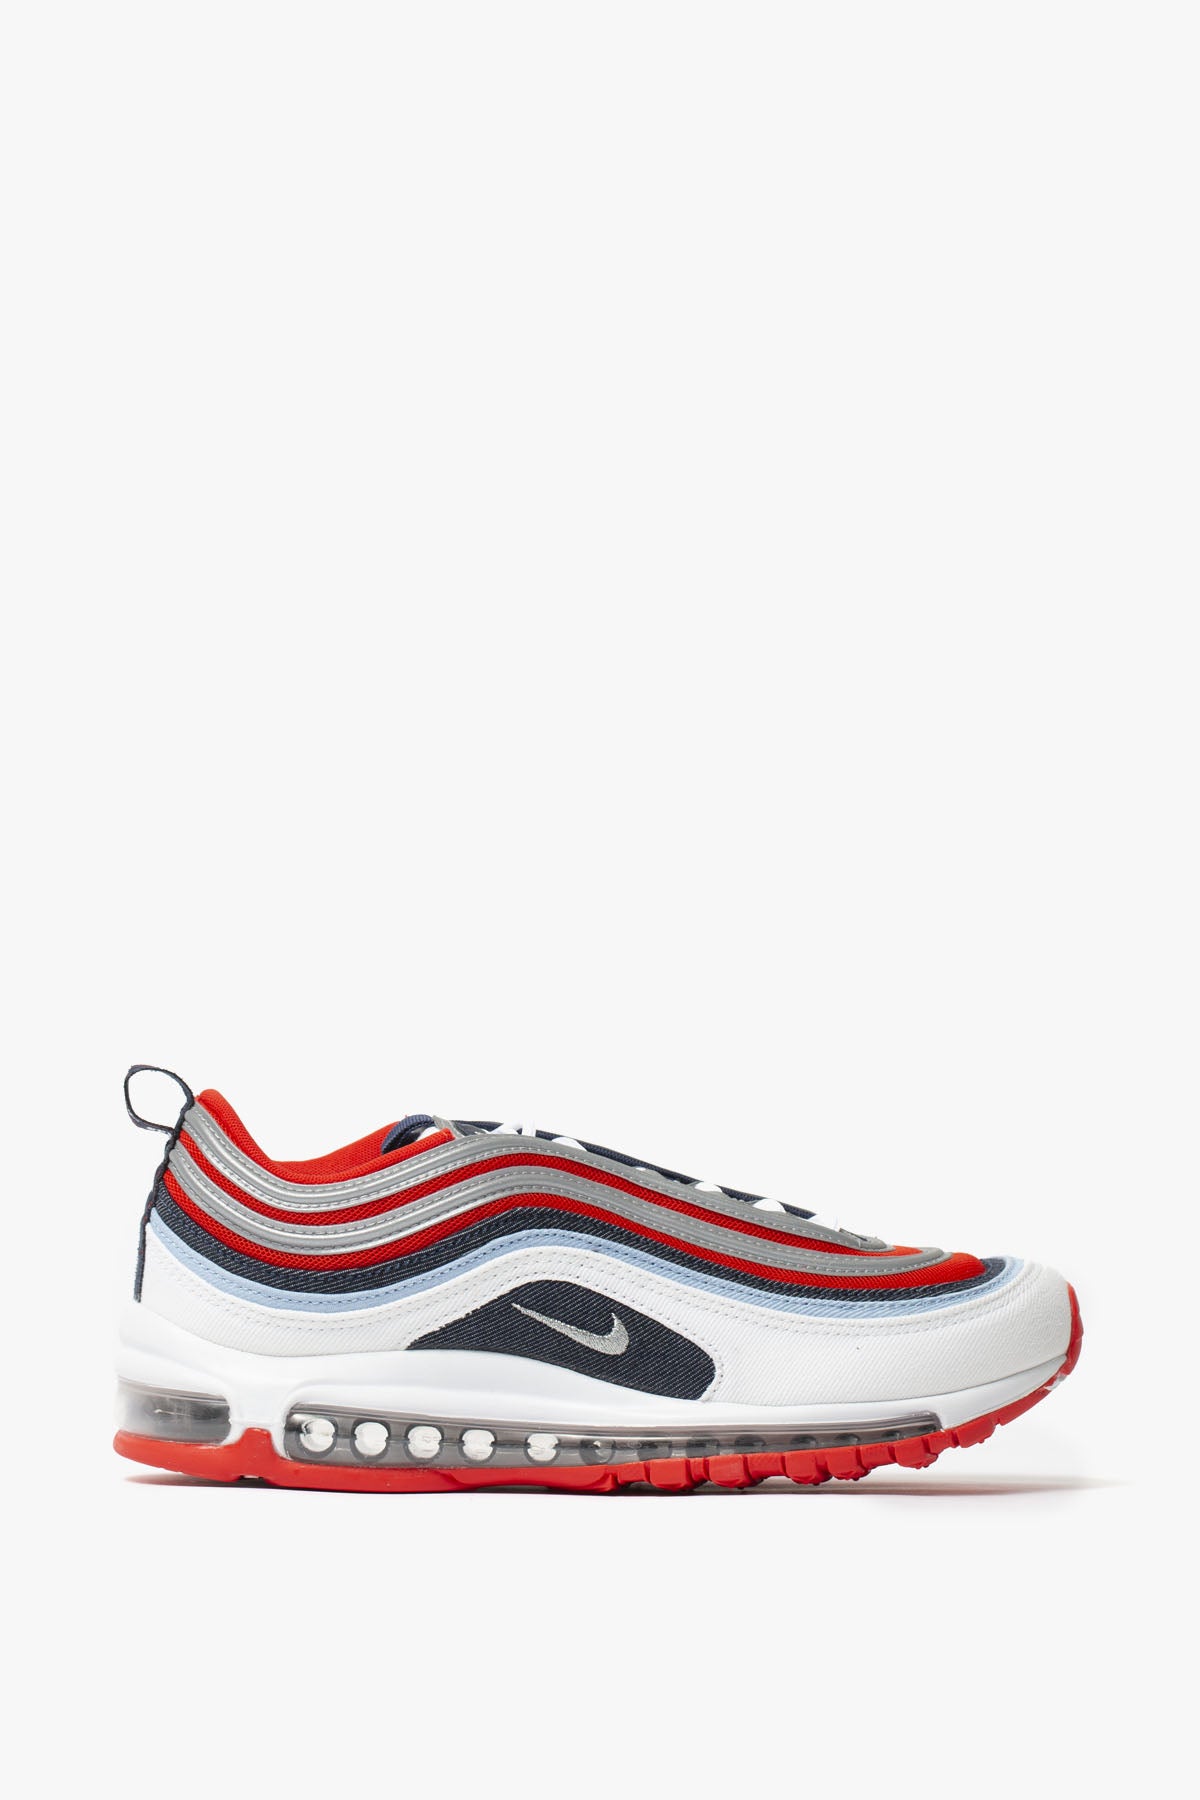 red air max 97 in store